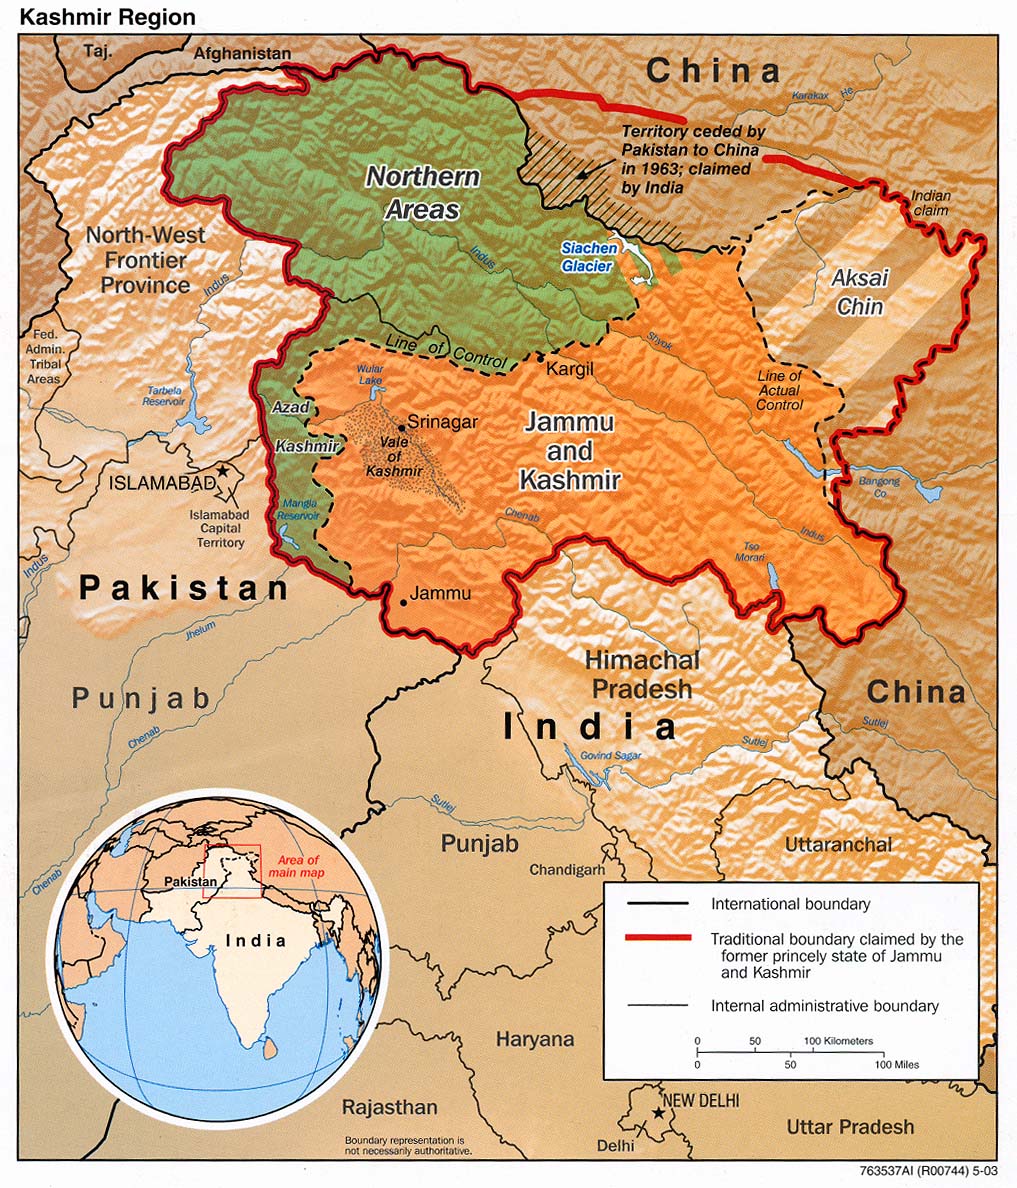 Kashmir: Why India and Pakistan fight over it